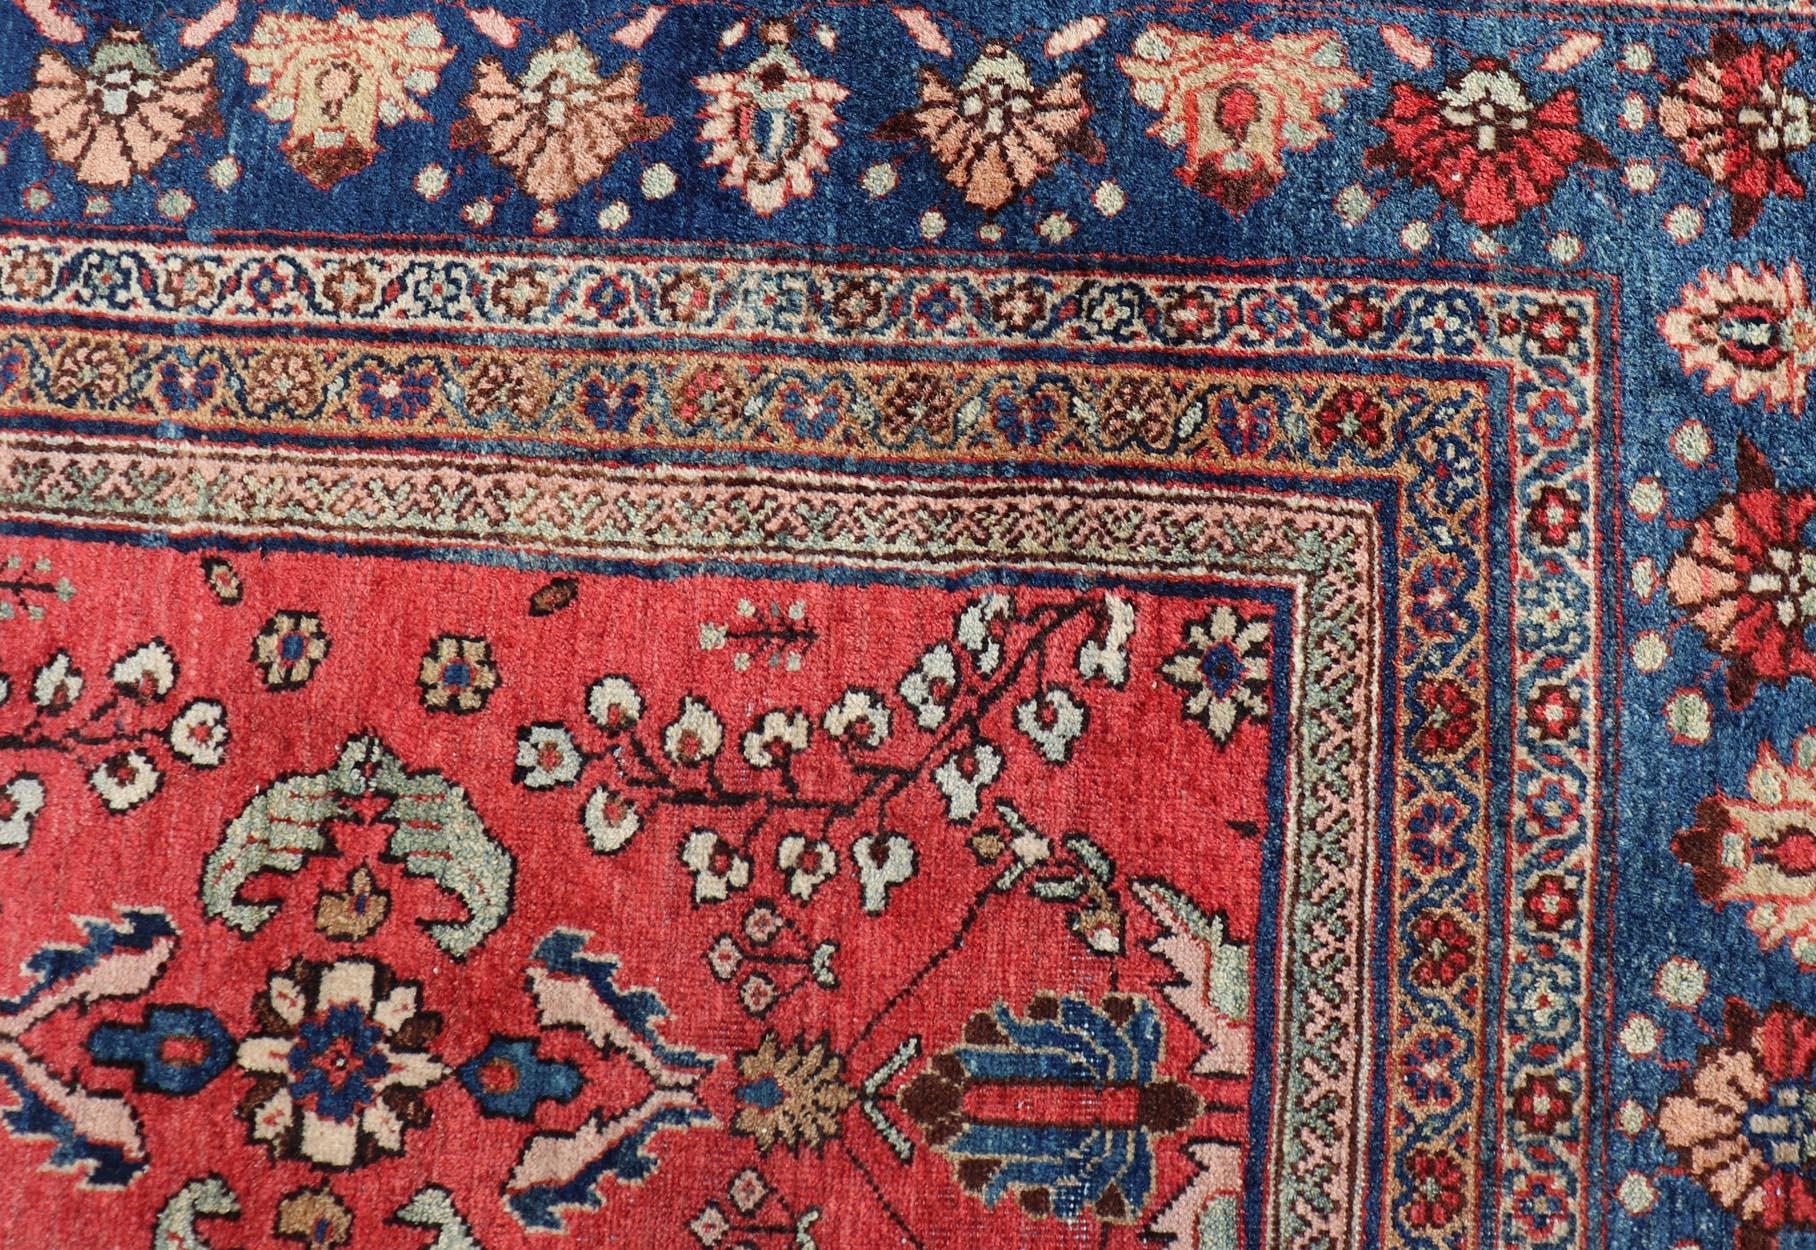 Antique Hand Knotted Persian Mahal with All-Over Florals On A Red Filed. Keivan Woven Arts rug/W22-0804, country of origin / type: Iran / Mahal, circa 1920, antique Mahal. Antique 
Measures: 8'9 x 12'0 
Antique Persian Mahal rug with all-over